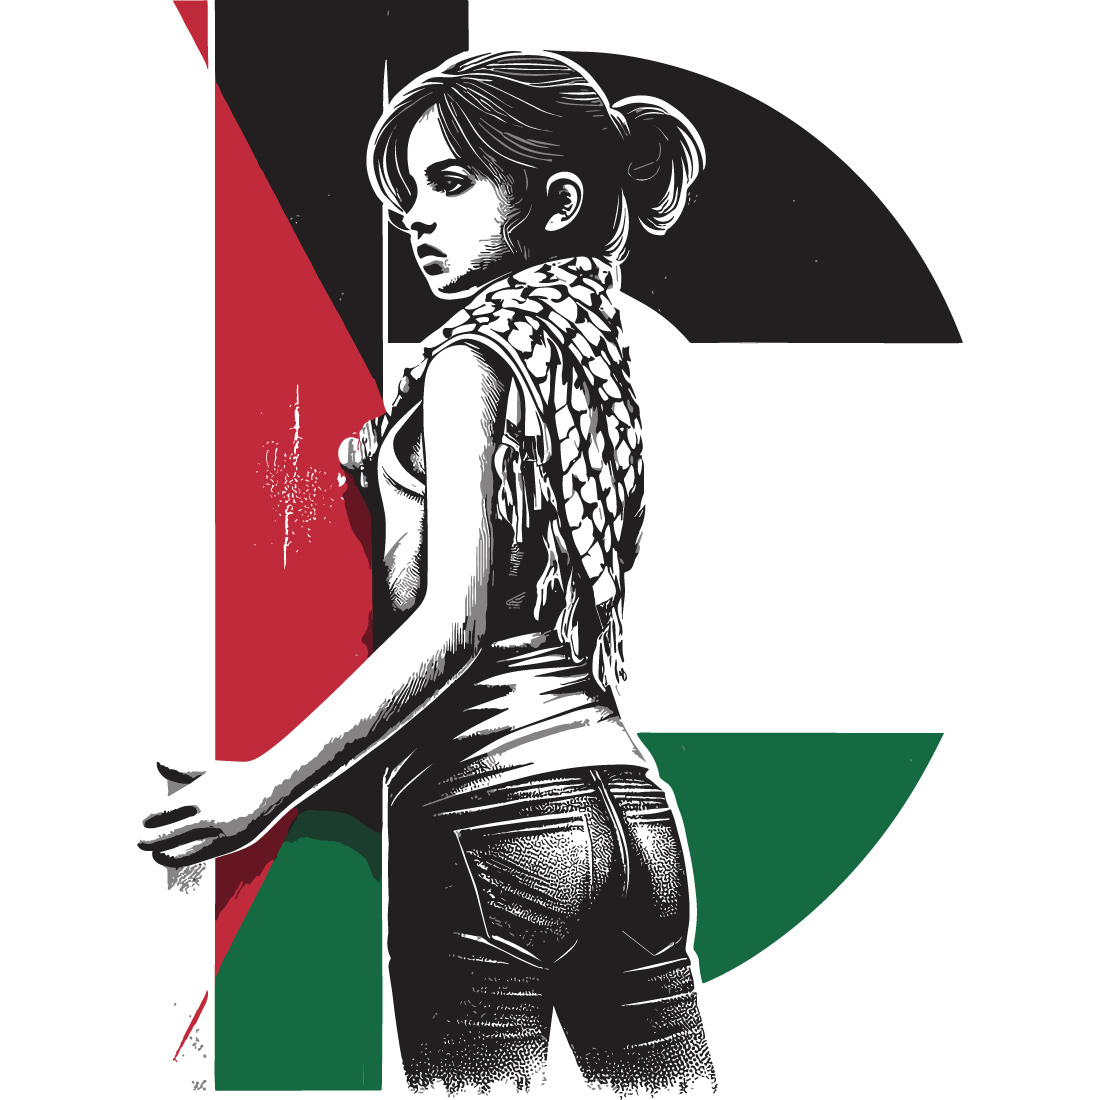 A Palestine girls t-shirt depicting the suffering and struggle of with letter or flag on white background preview image.